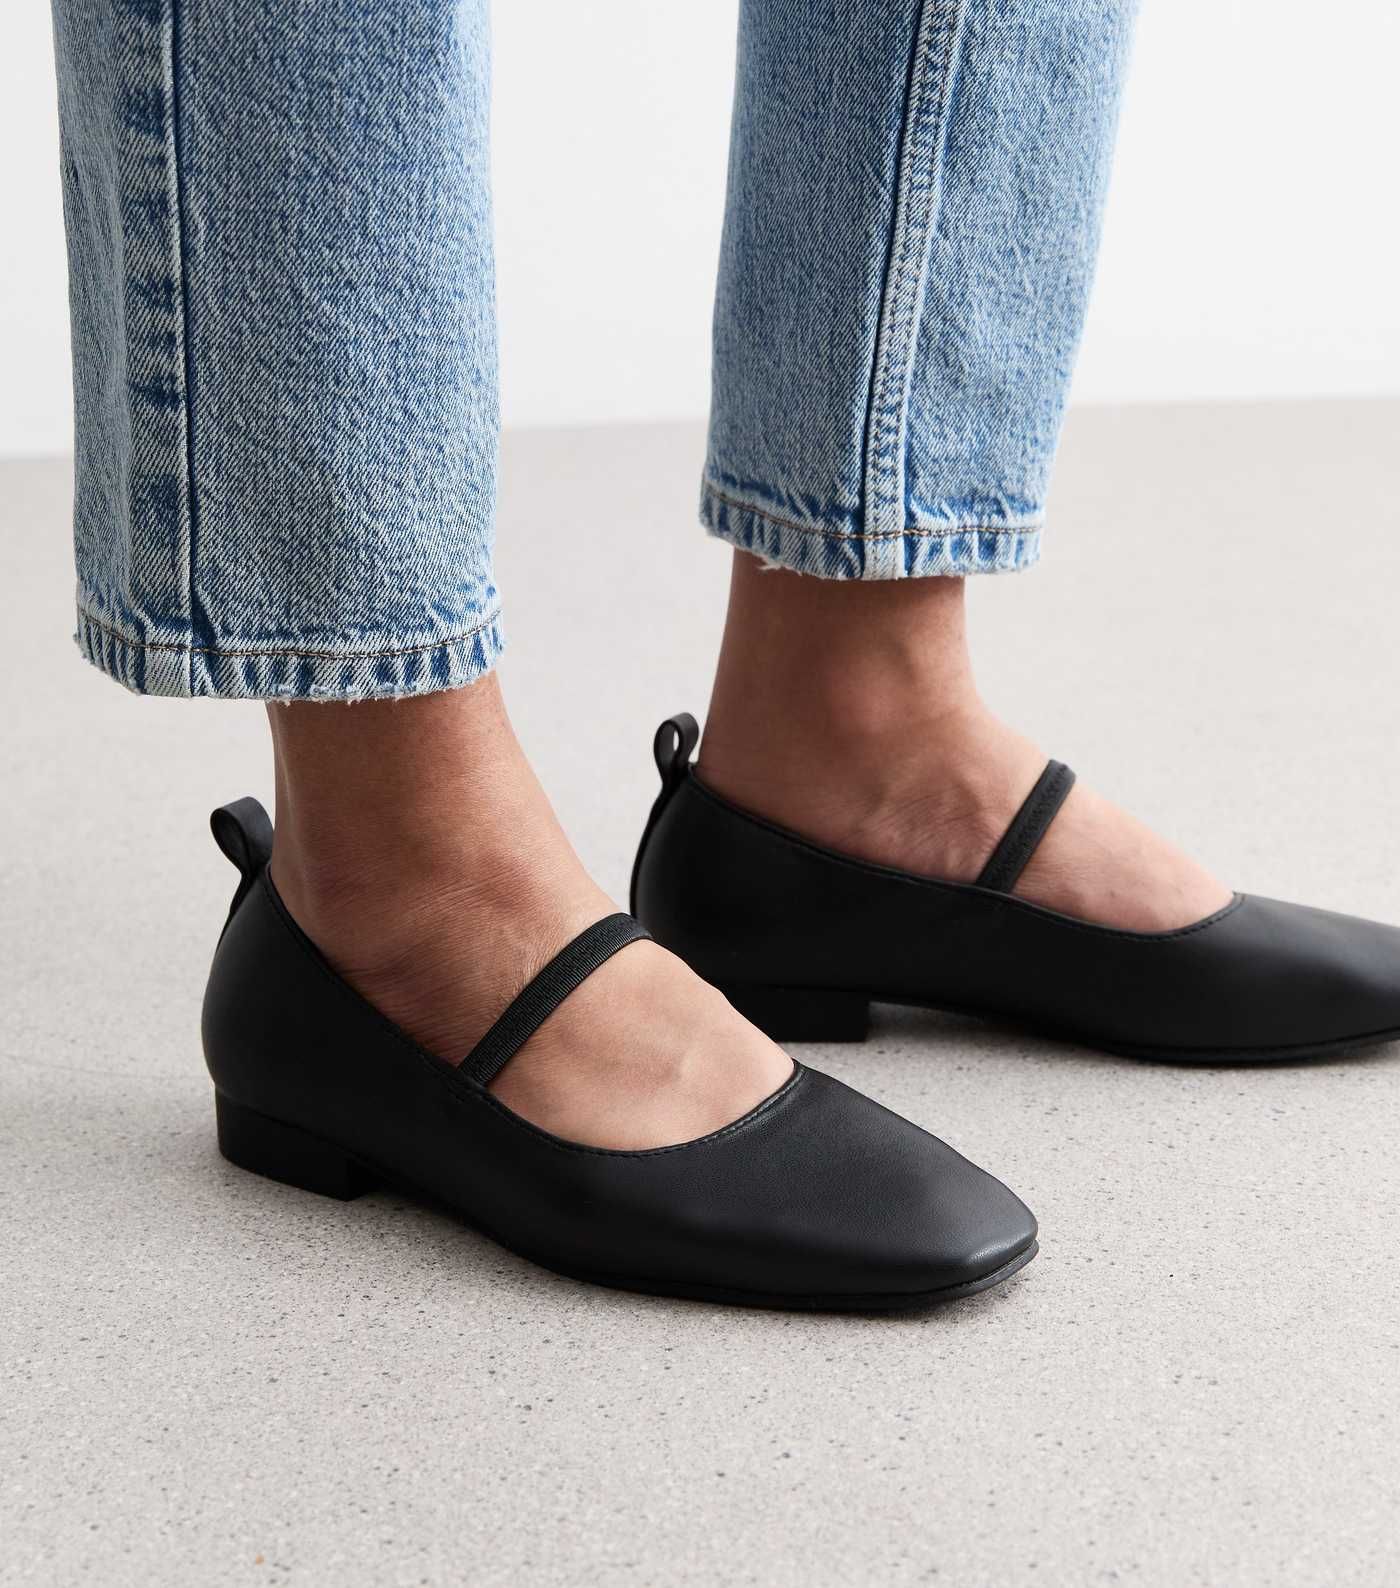 Black Elasticated Mary Jane Ballerina Pumps
						
						Add to Saved Items
						Remove from Sav... | New Look (UK)